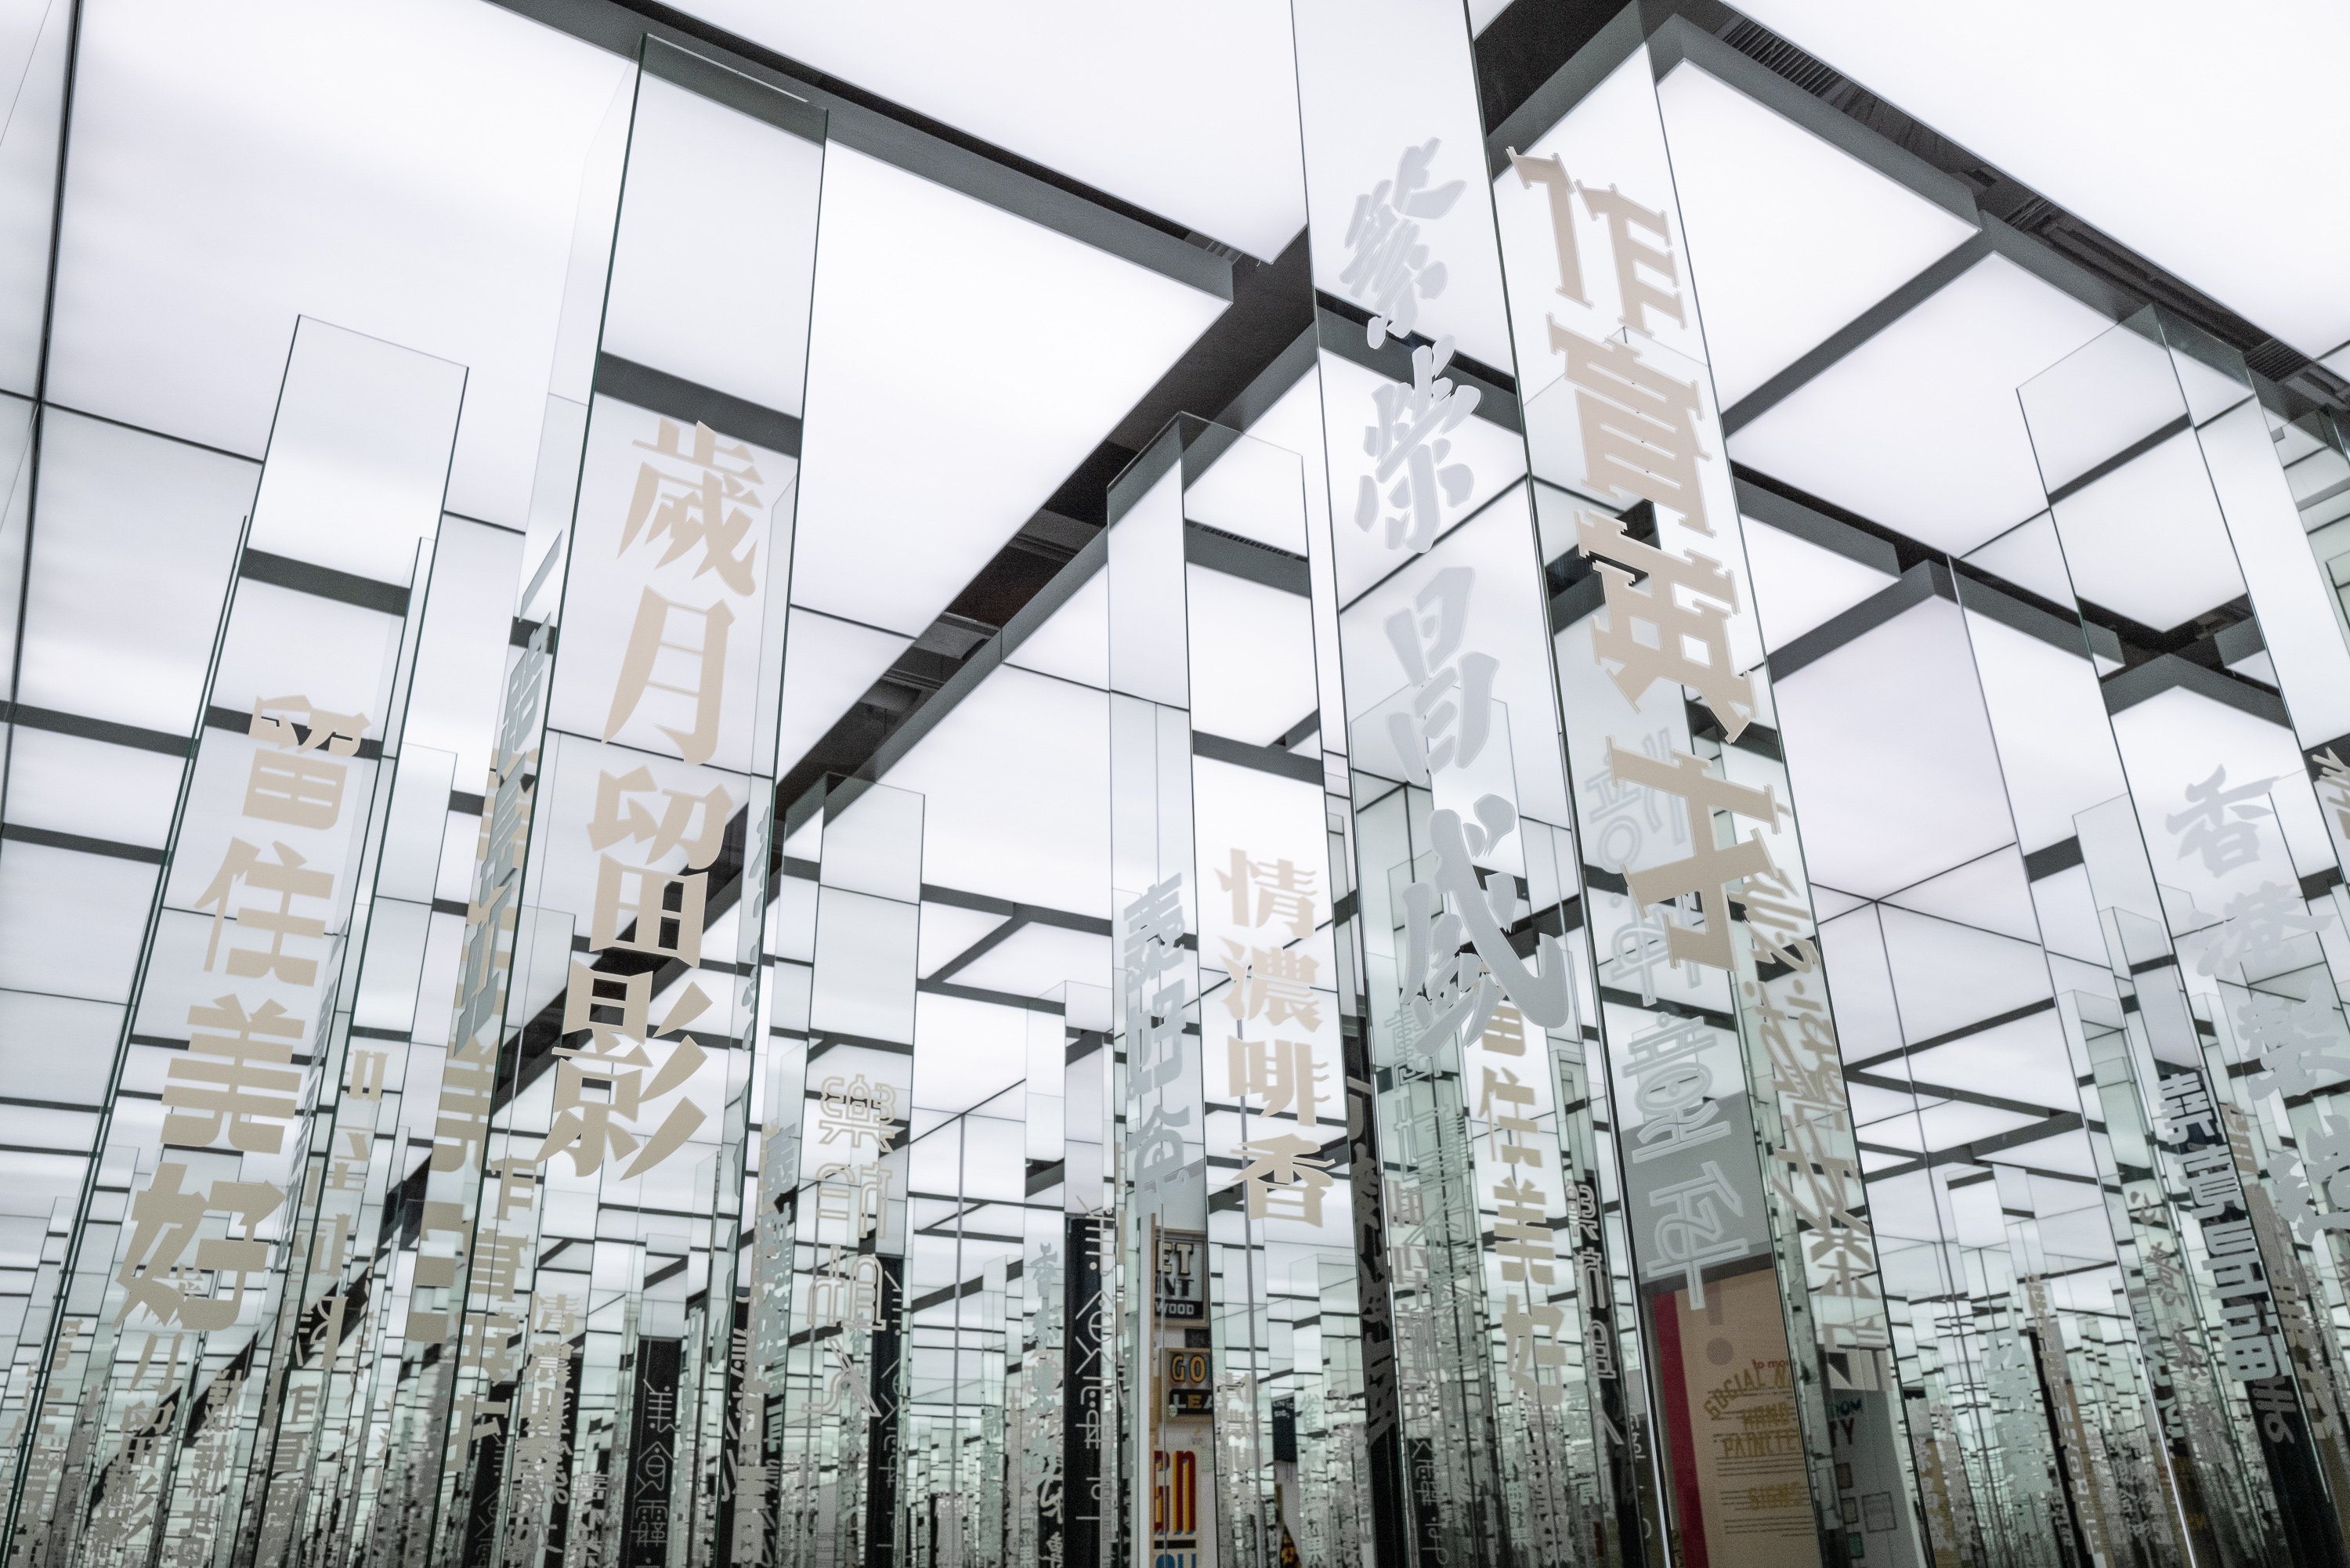 The Infinite Mirror Room of Bestowment, which includes hand-lettered signs inspired by the graphic landscape of To Kwa Wan, along with 110 four-character aphorisms engraved on mirrored pillars, is part of TypePOP Show in Hong Kong. Photo: Gate33 Gallery
